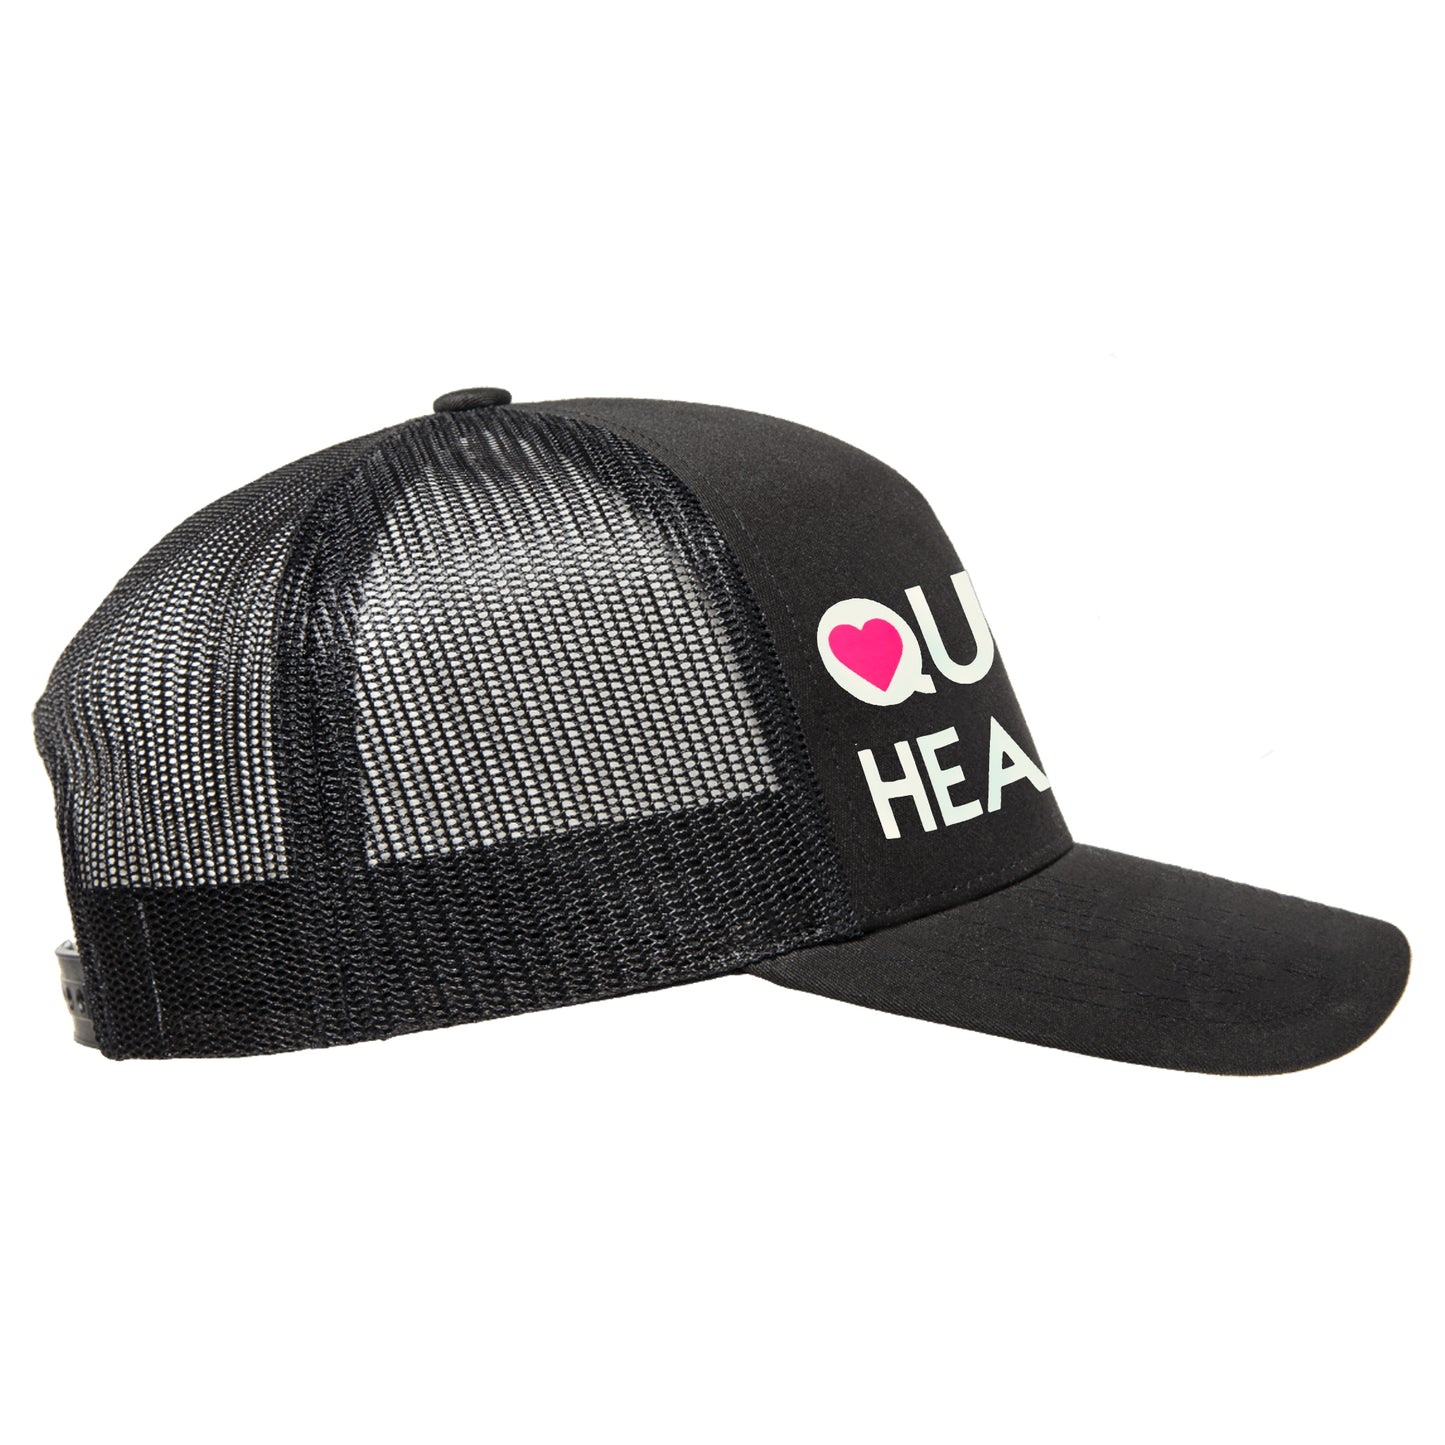 Classic black snapback hat with matte glow-in-the-dark and pink neon “Queer-hearted” detail by BBJ / Glitter Garage. Unisex style, breathable mesh back with matching plastic snap closure fits most. Side view.